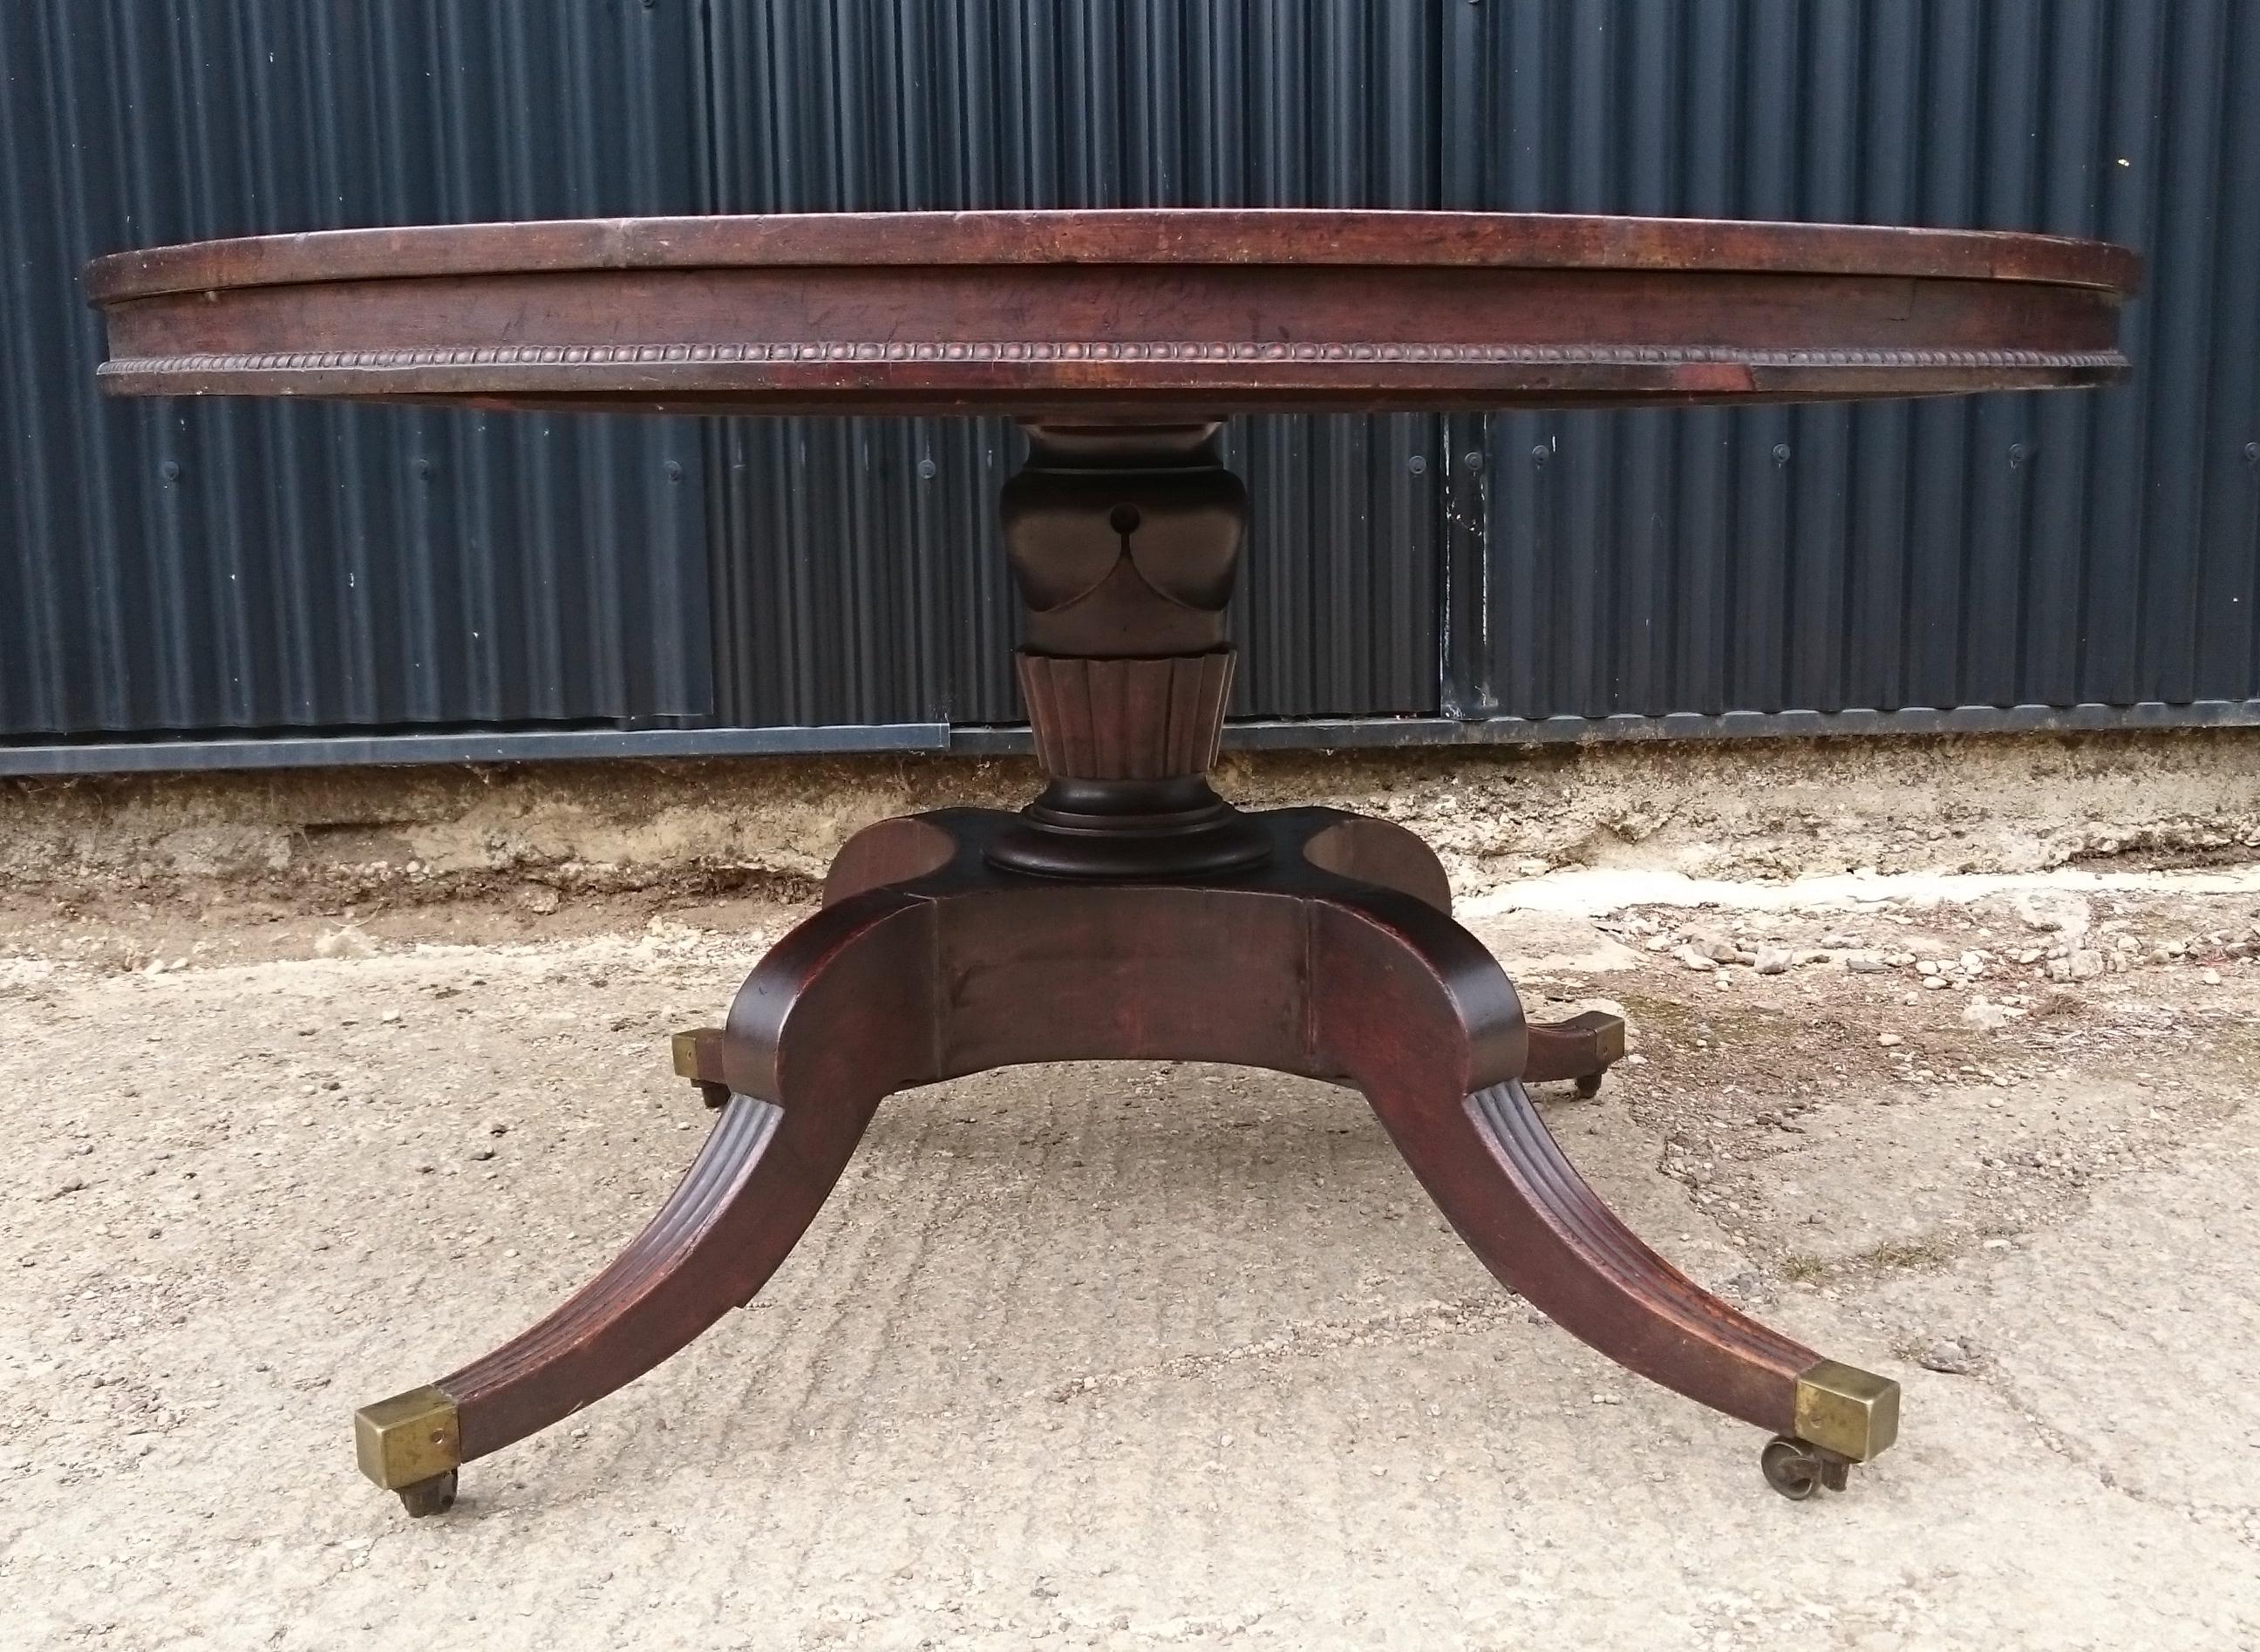 Early 19th century Regency antique breakfast table, unusually made from oak with oak crossbanding. The base and leg arrangement is very tastefully drawn, the legs are long and slender with elegant knee and the column has a very pretty stylised